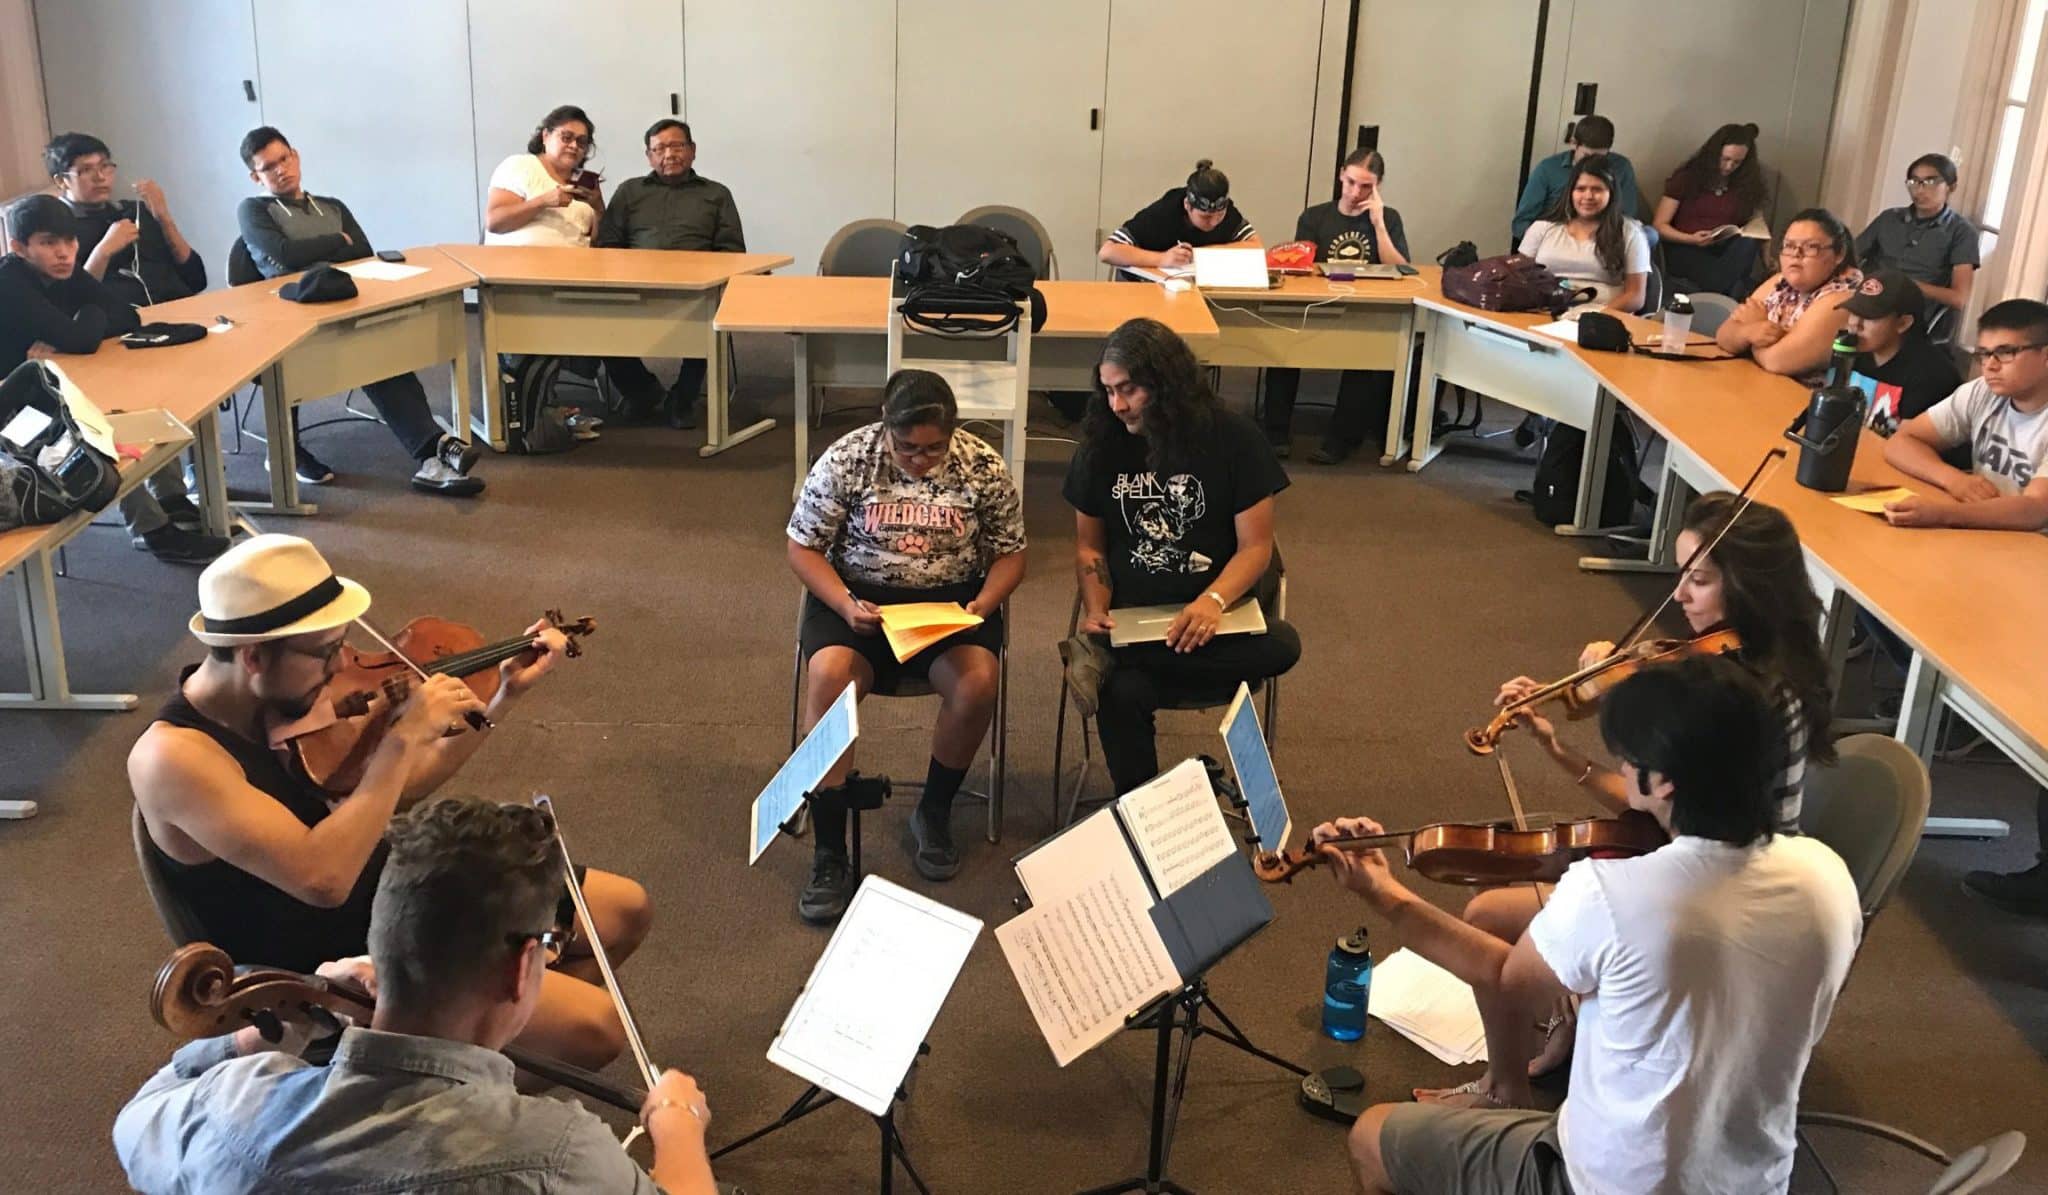 Raven Chacon (right) working with Native American students interested in musical composition. Since 2004, Chacon has served as composer-in-residence for the Native American Composer Apprentice Project (NACAP), mentoring over 300 high school Native composers in the writing of new string quartets. Photo: Clare Hoffman